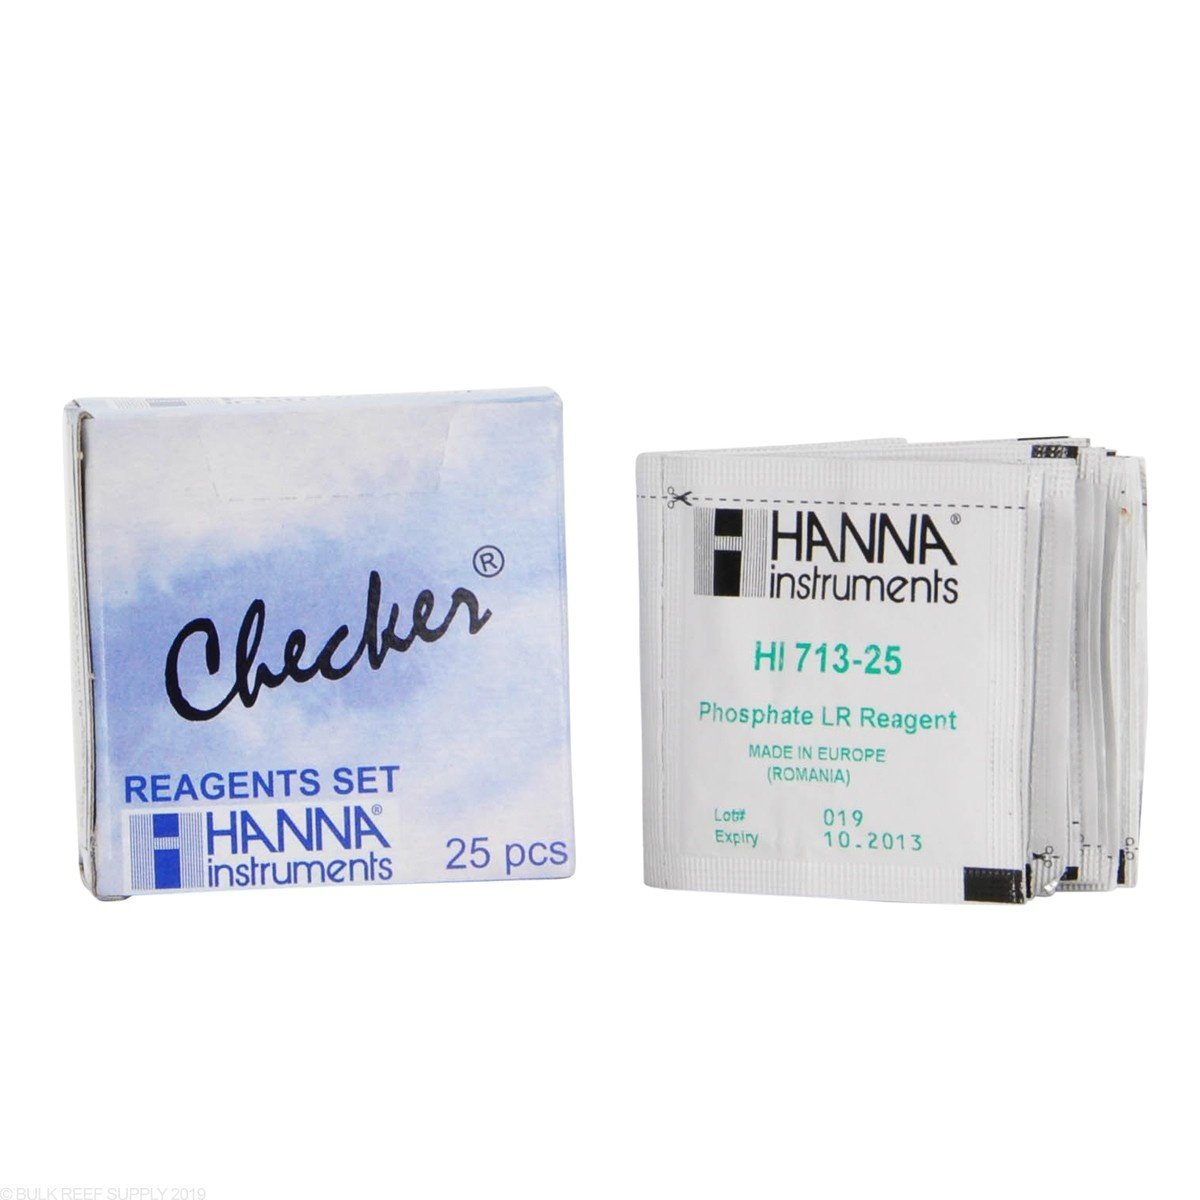 Hanna Reagents for Marine Phosphate LR checker (25 tests)